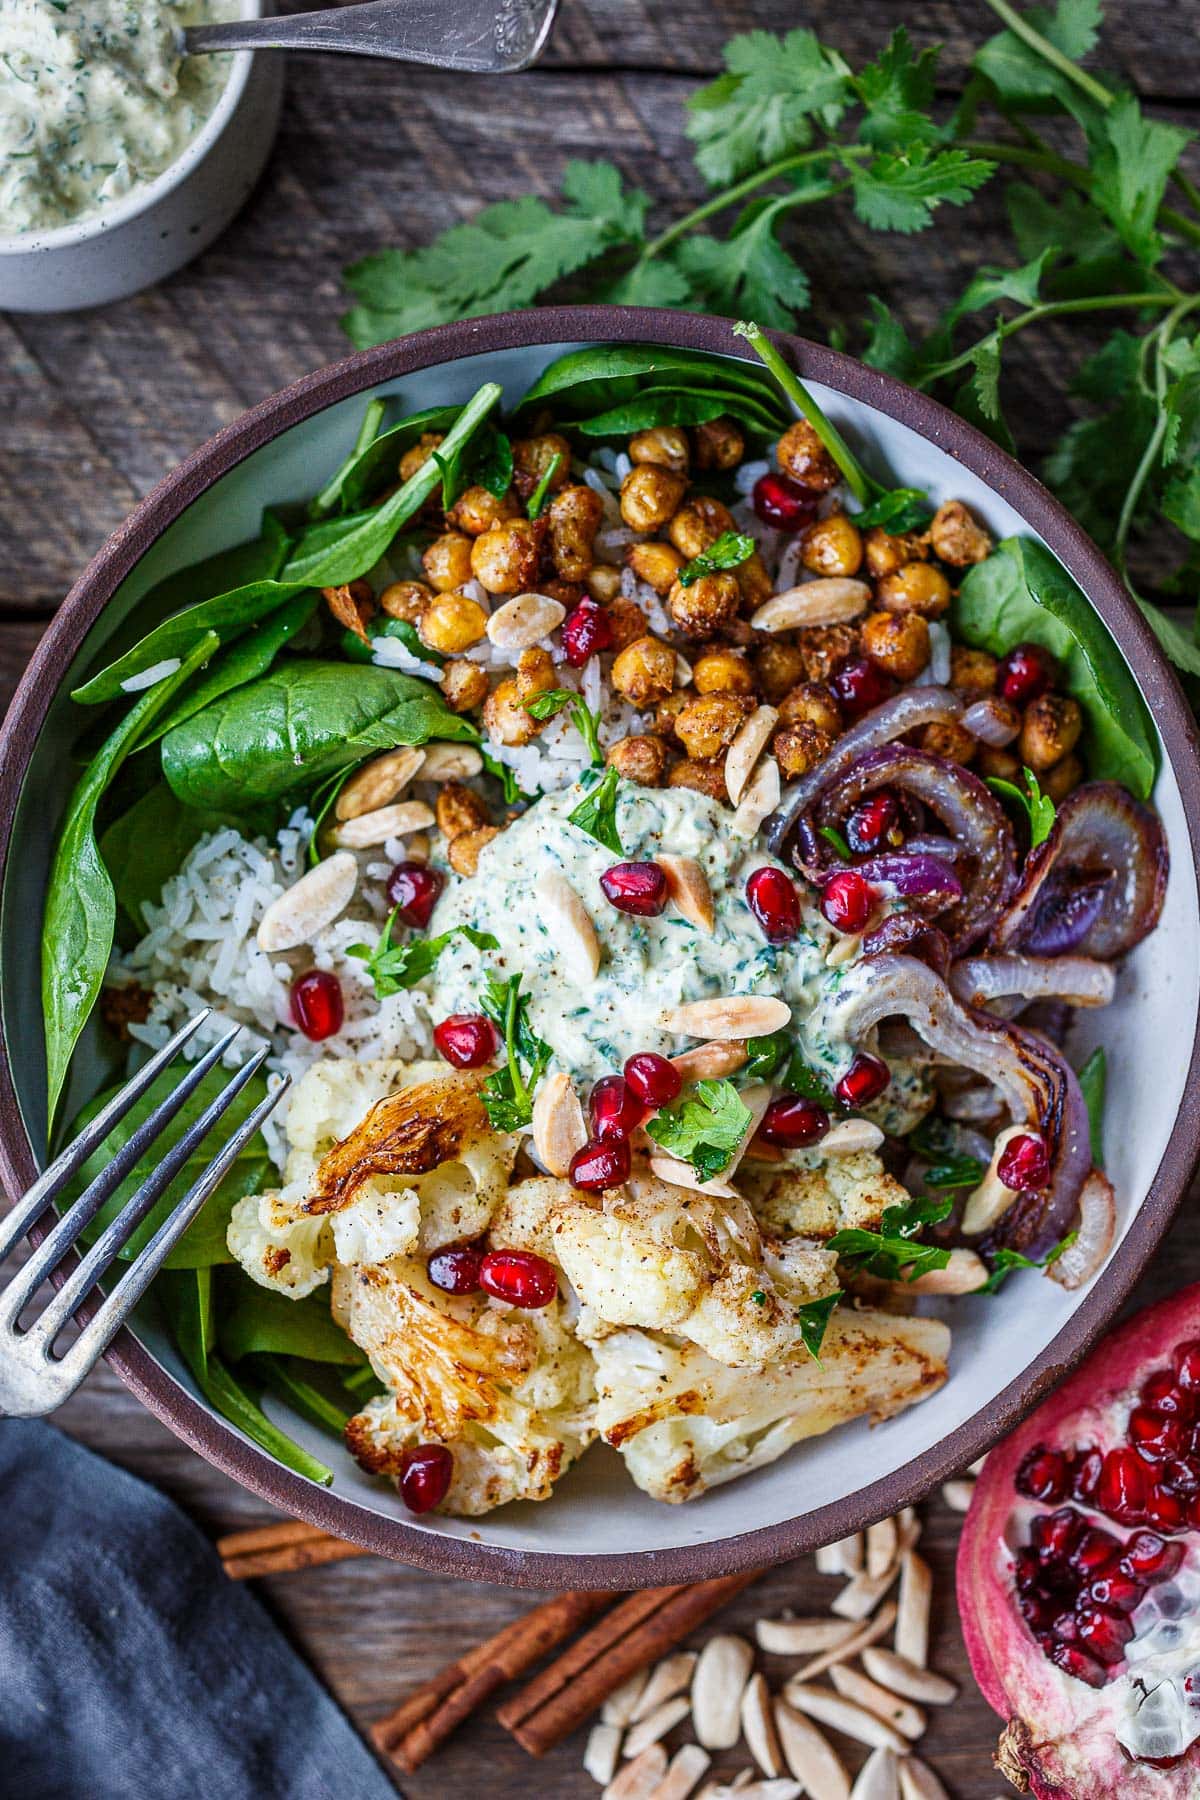 Cauliflower Chickpea Bowls served over Moroccan rice with spinach, almonds.